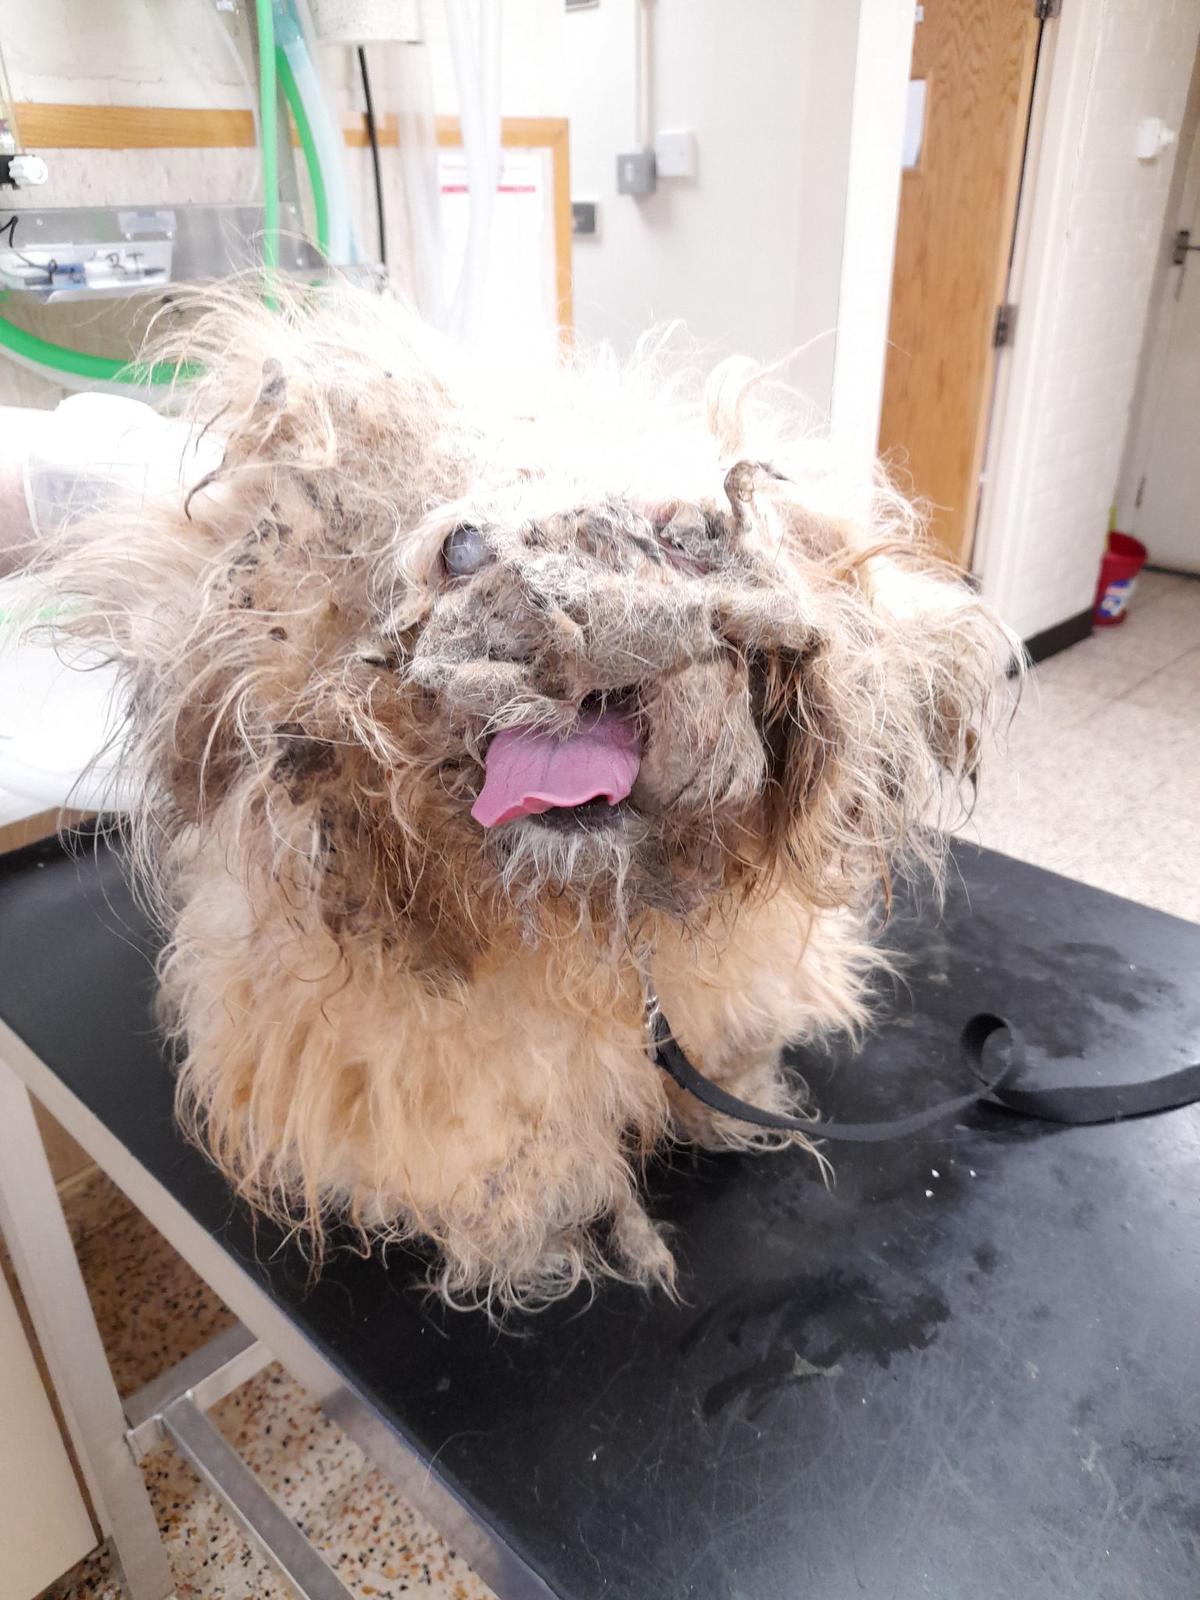 Morris looked like a pile of rags before his transformation. (Courtesy of <a href="https://www.rspca.org.uk/">RSPCA</a>)